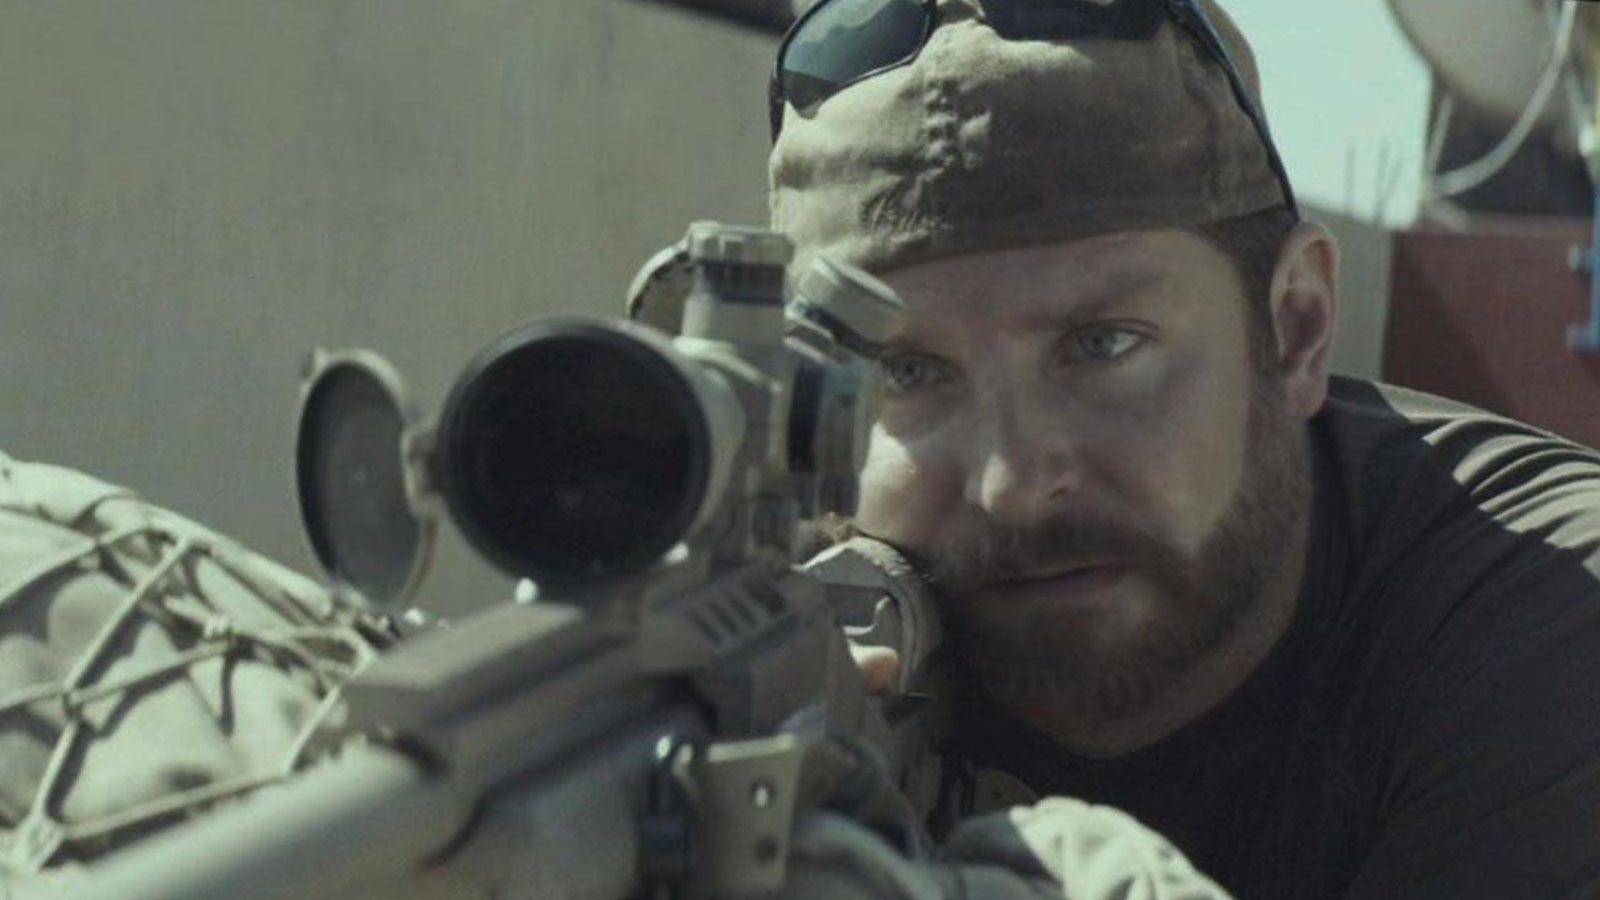 American Sniper Clint Eastwood Videos at ABC News Video Archive at